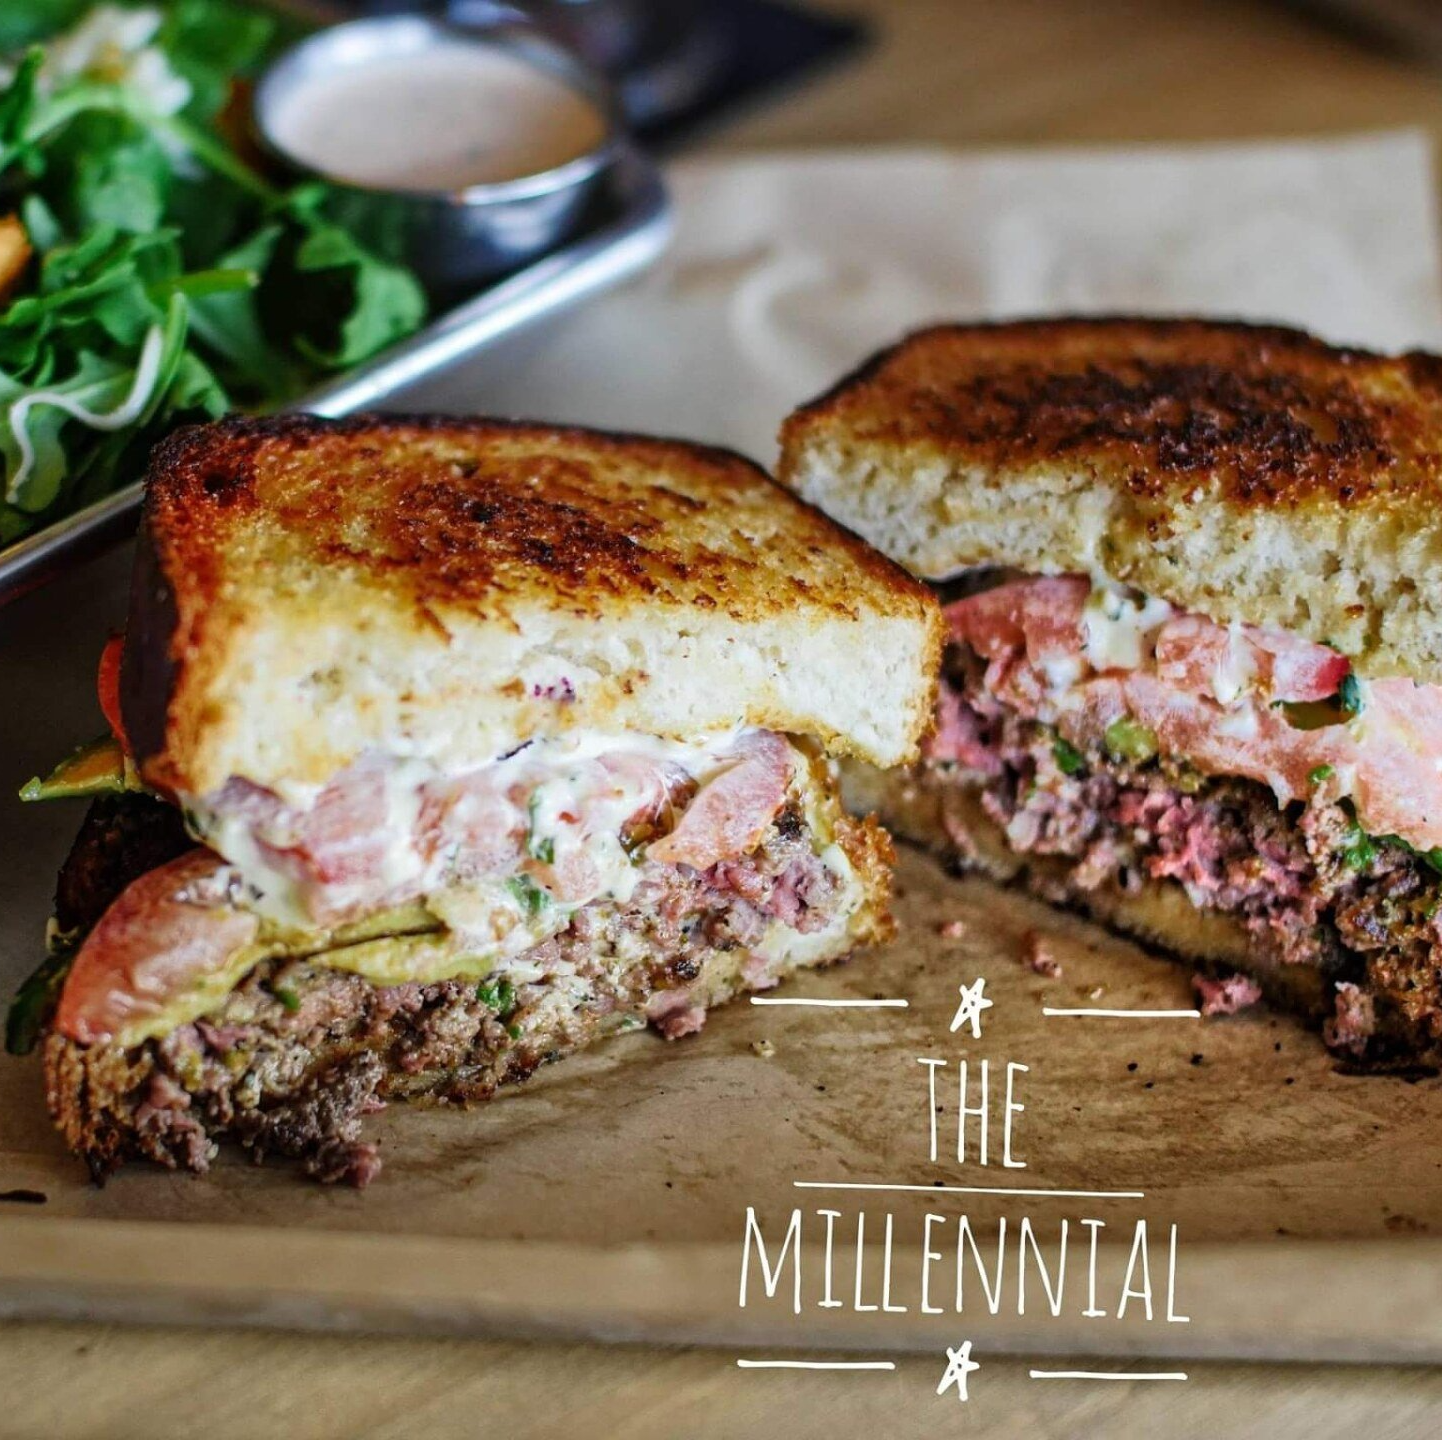 The Millennial burger from Brewer's Kitchen features avocado